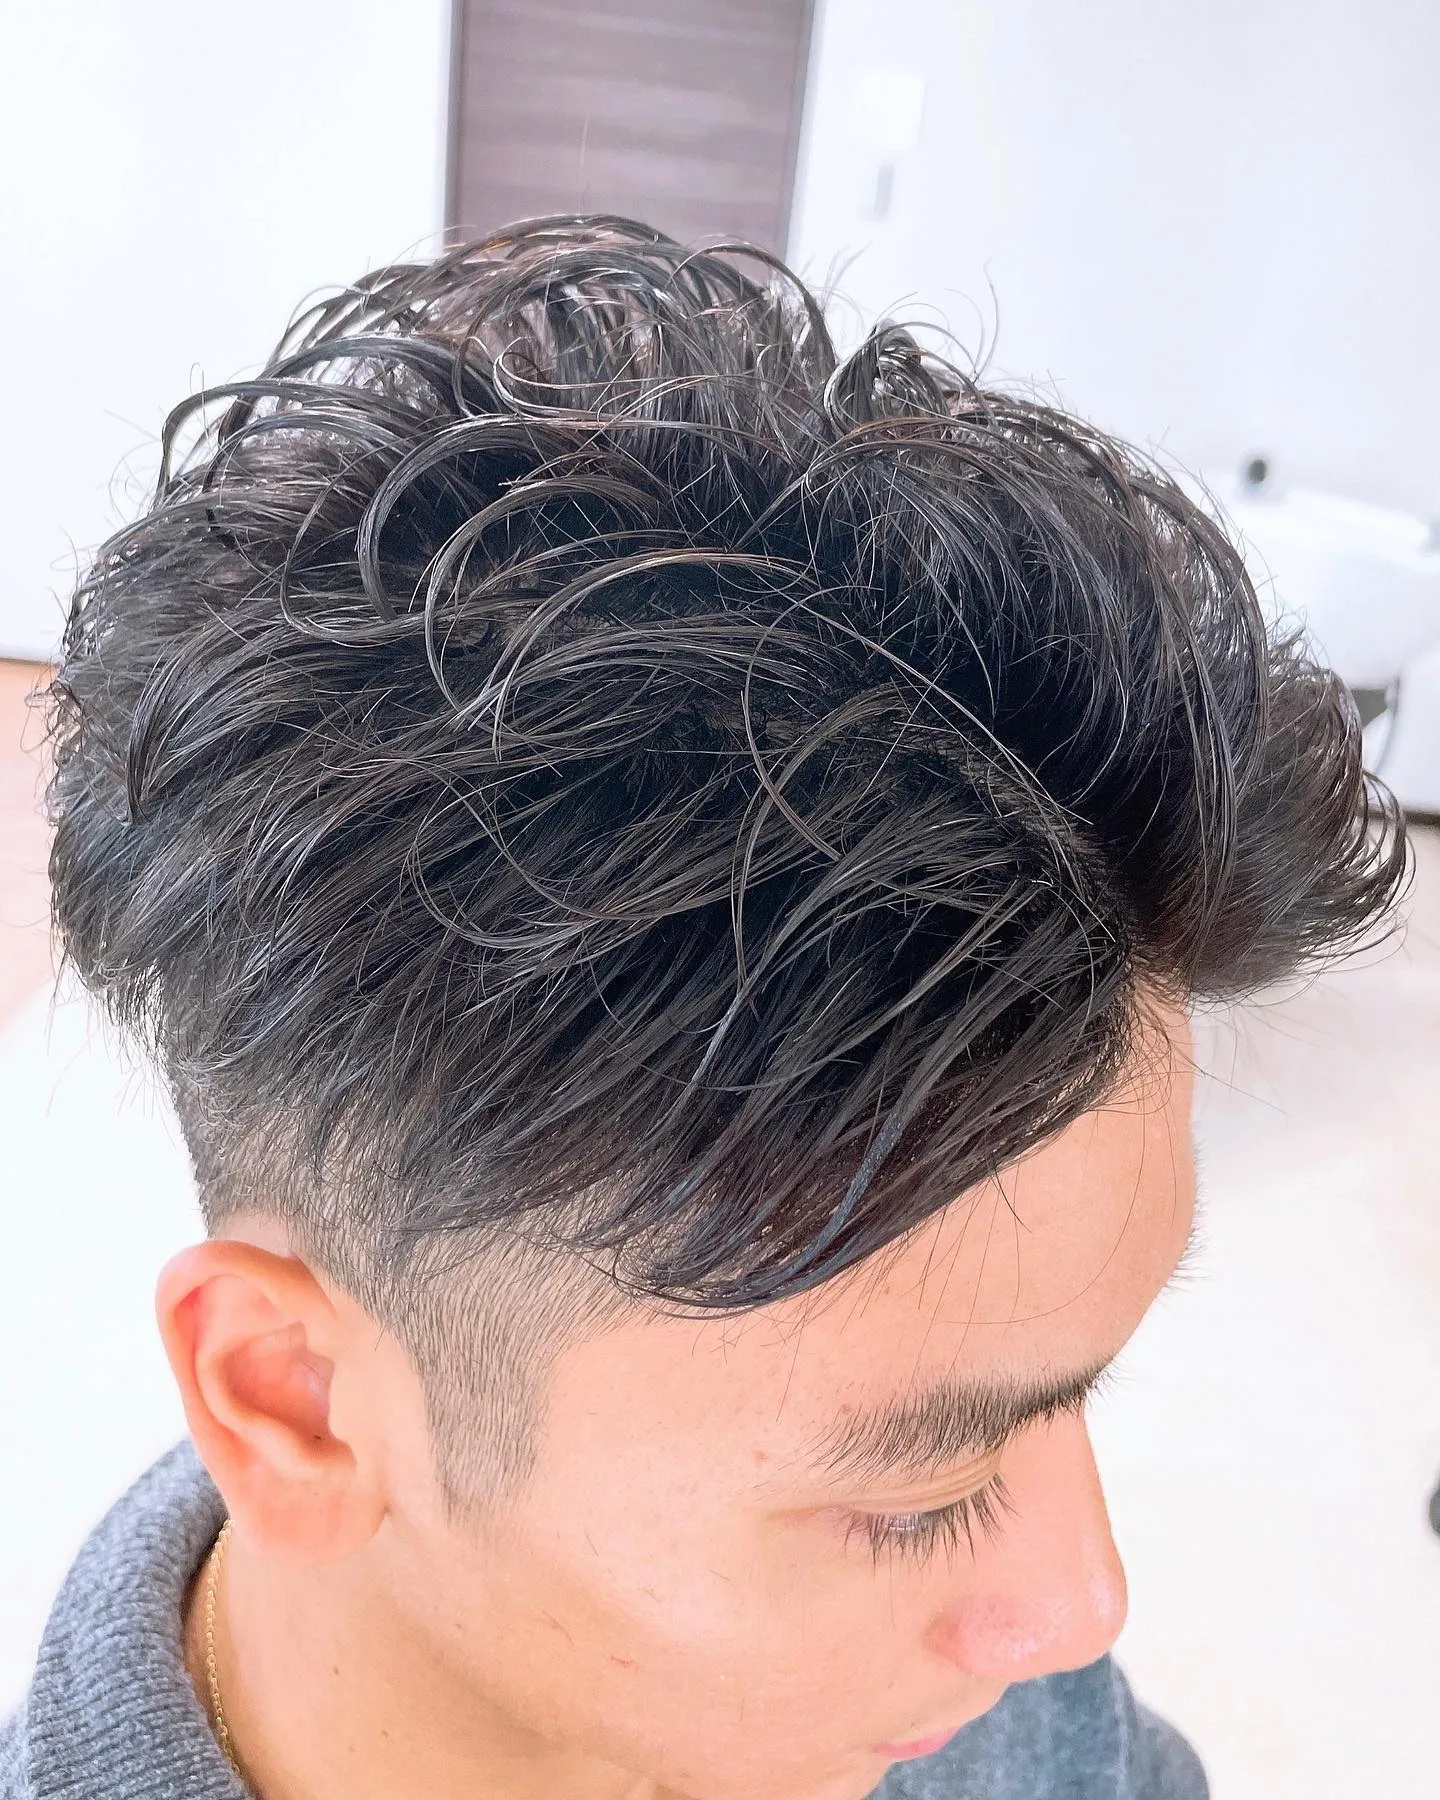 e.h. to Next /木津川市美容室メンズヘアサロン